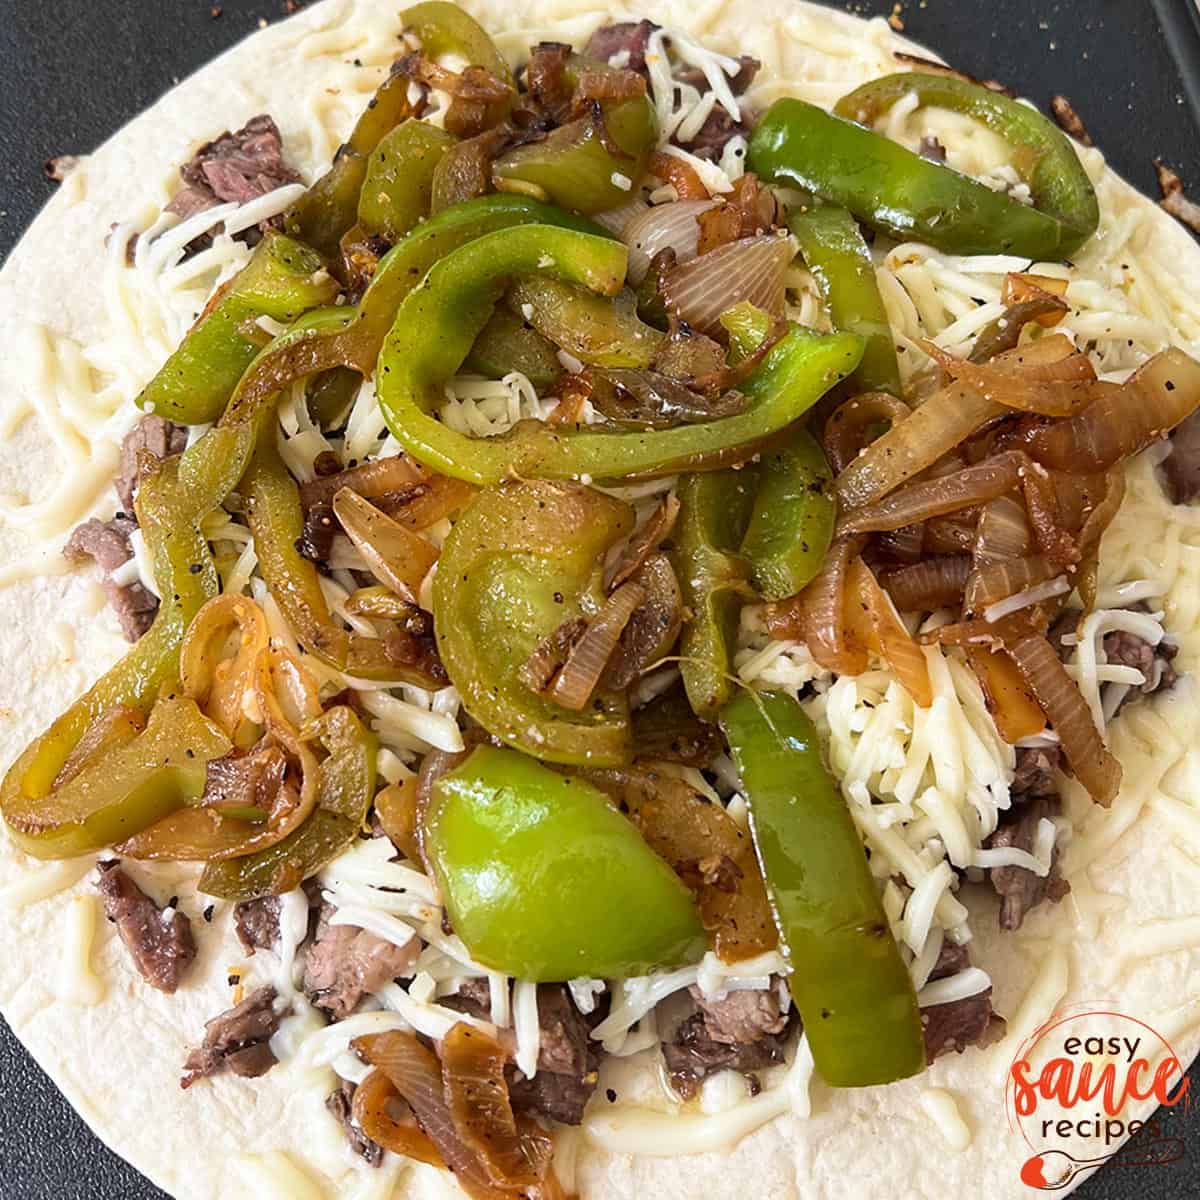 a fajita with peppers and onions on top of cheese and steak